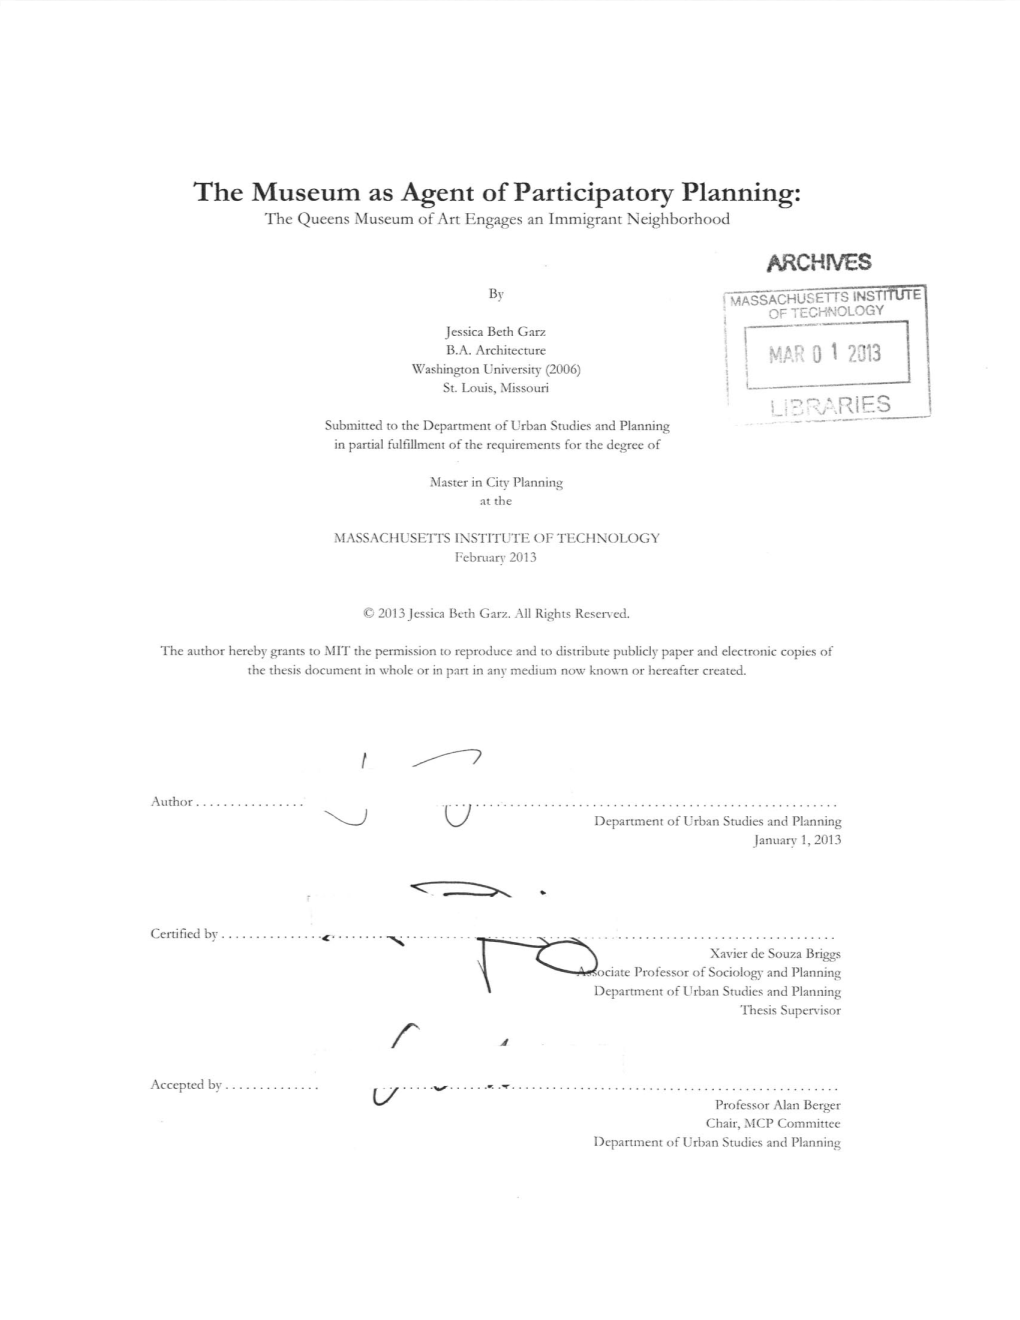 The Museum As Agent of Participatory Planning